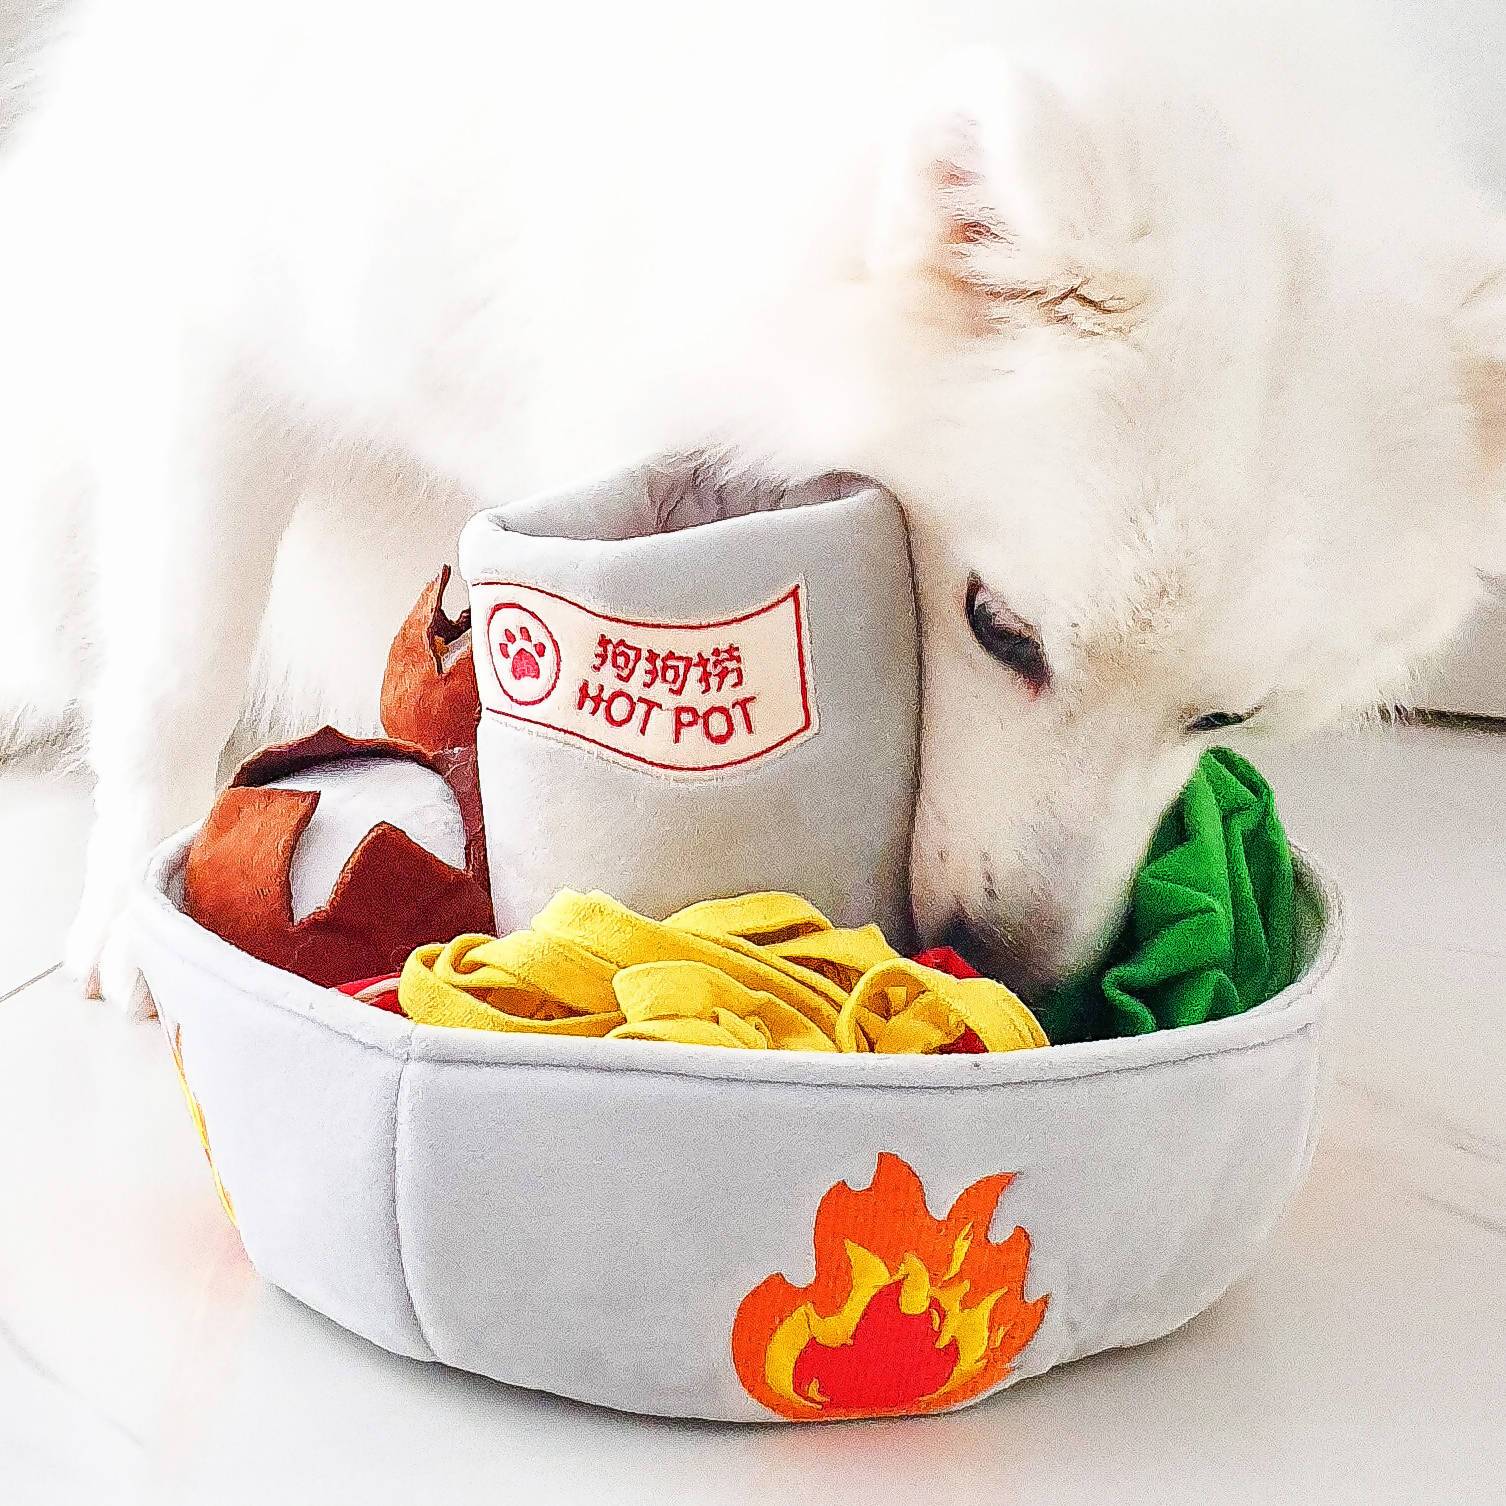 Premium Hot Pot Steamboat Interactive Nosework Chew Toy for Pet